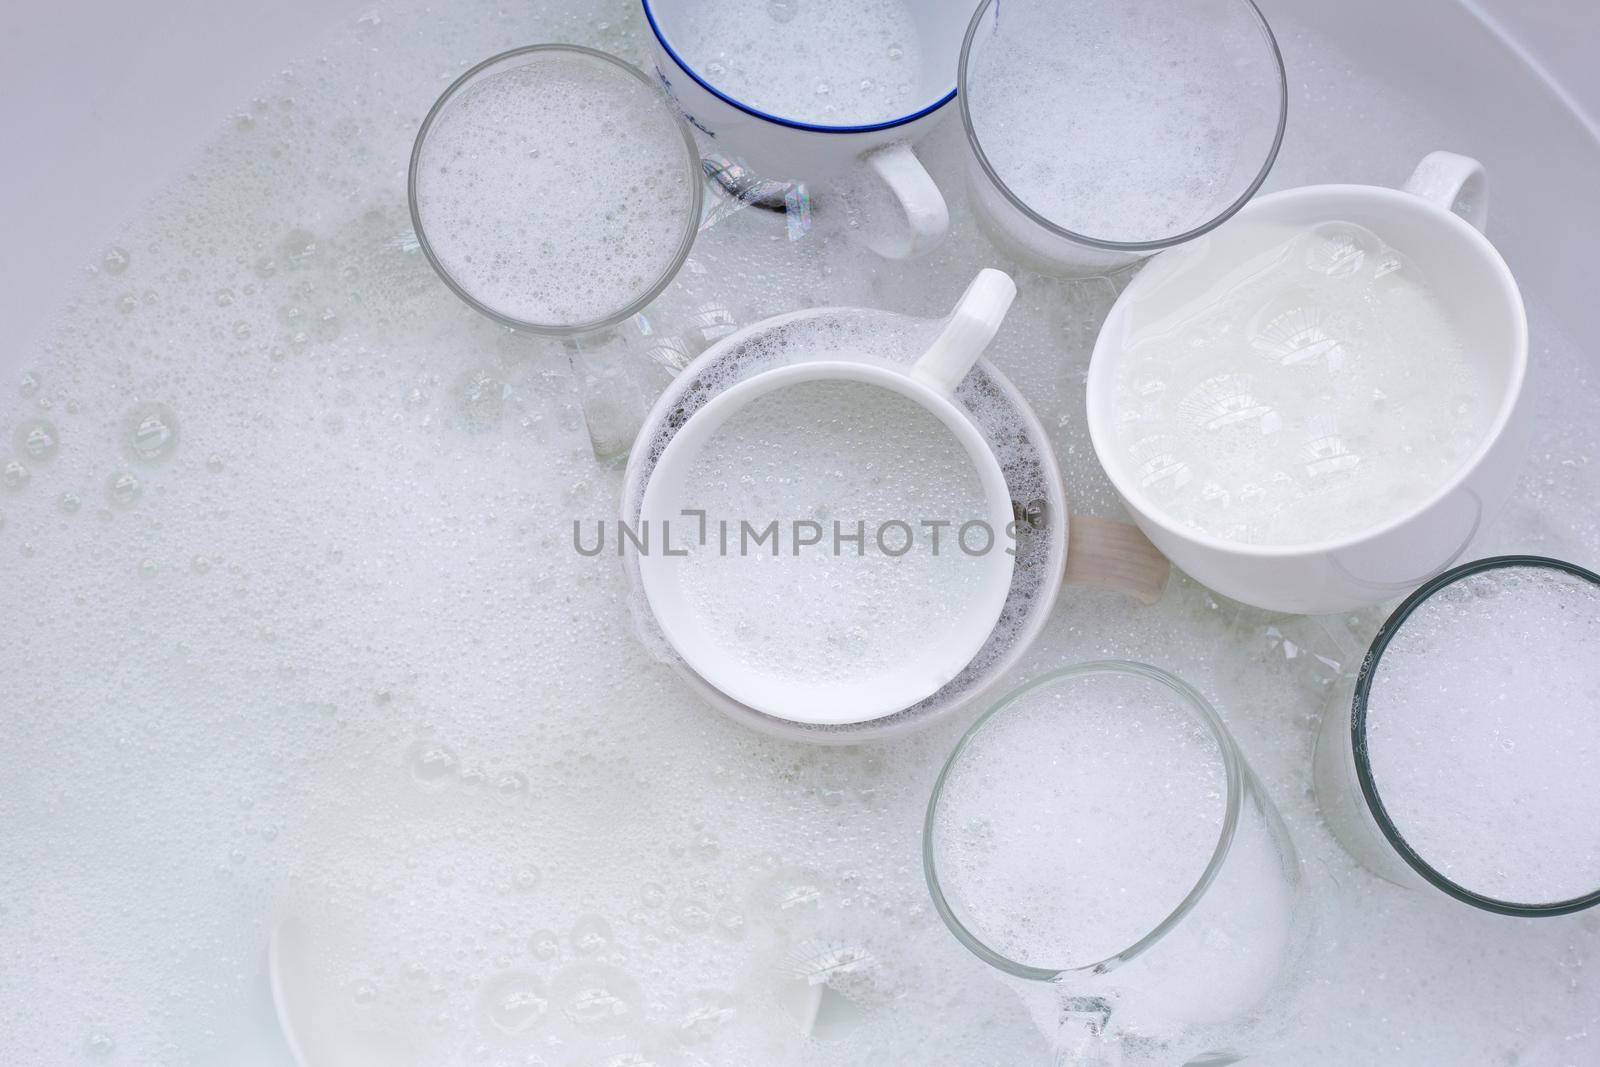 Washing an used drinking glasses and cups by Bowonpat